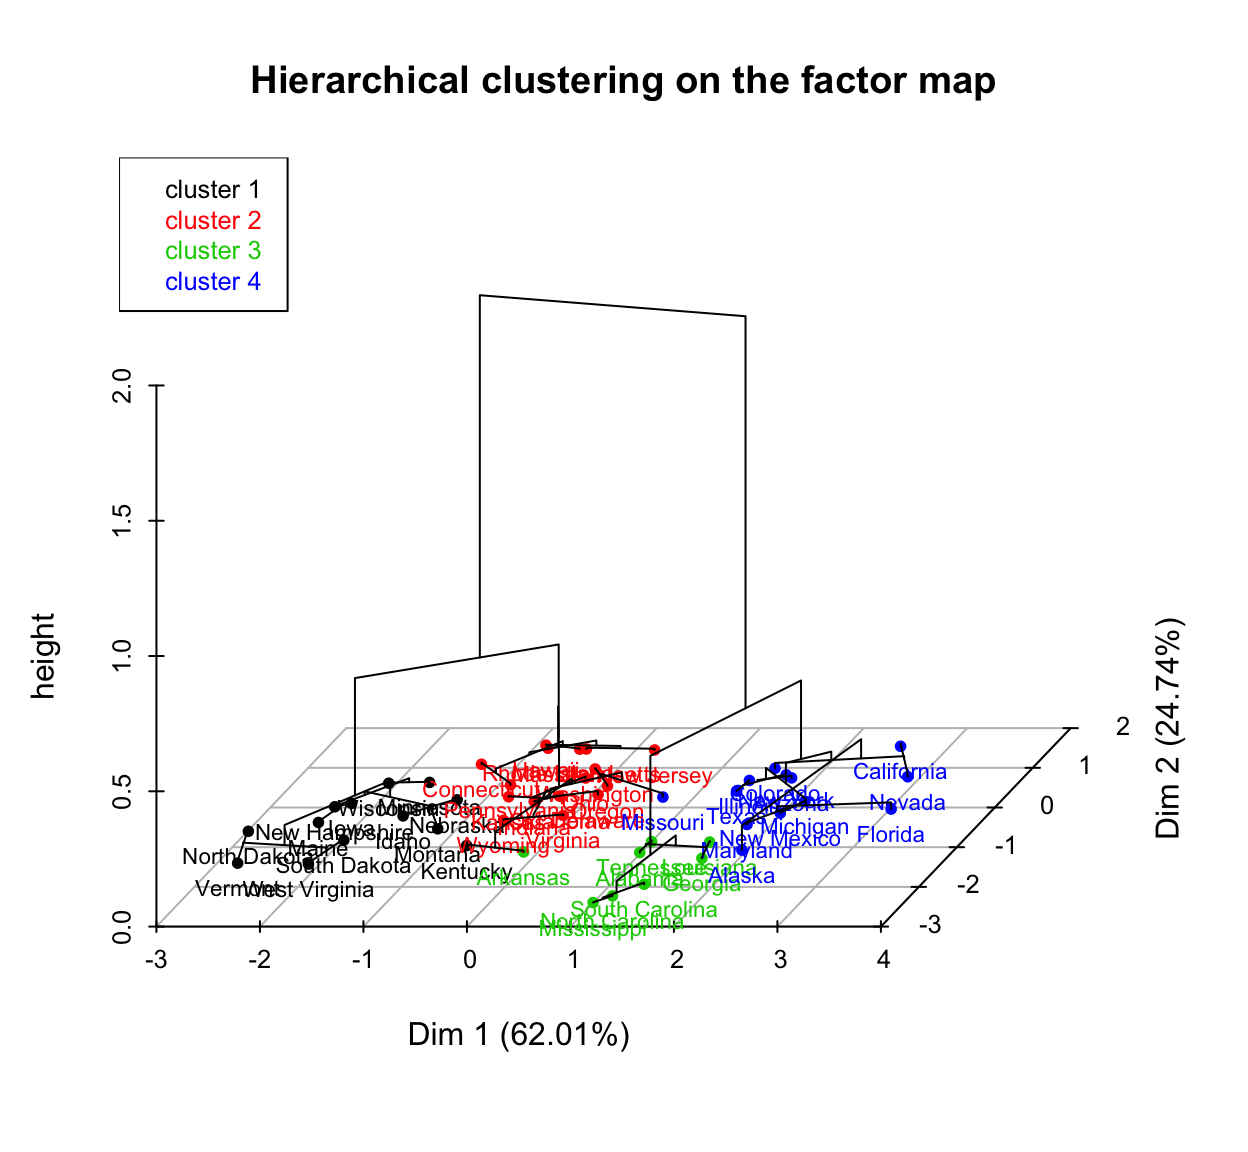 011-hcpc-hierarchical-clustering-on-principal-components-3d-map-1.png